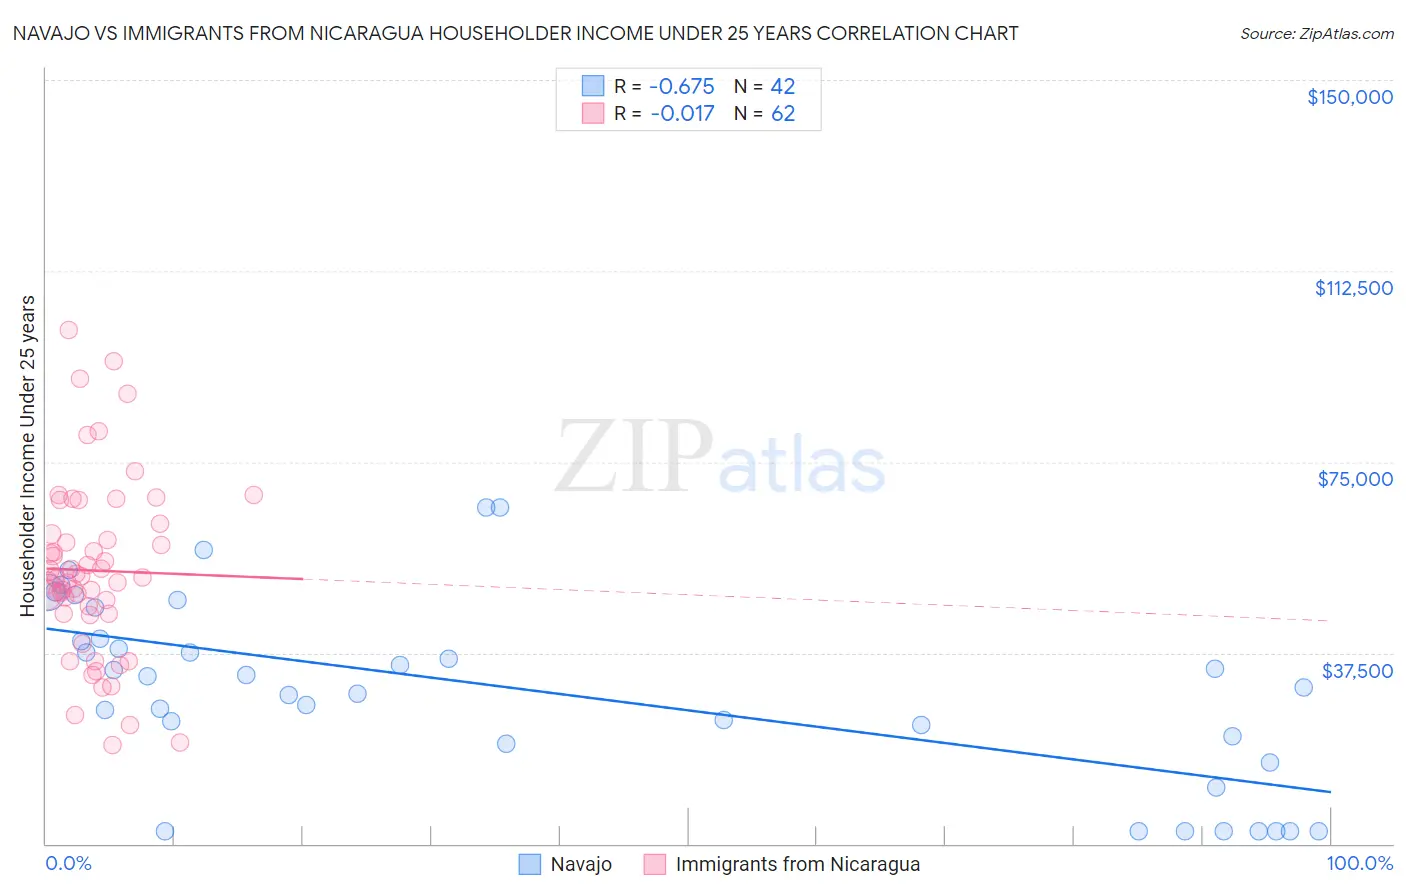 Navajo vs Immigrants from Nicaragua Householder Income Under 25 years